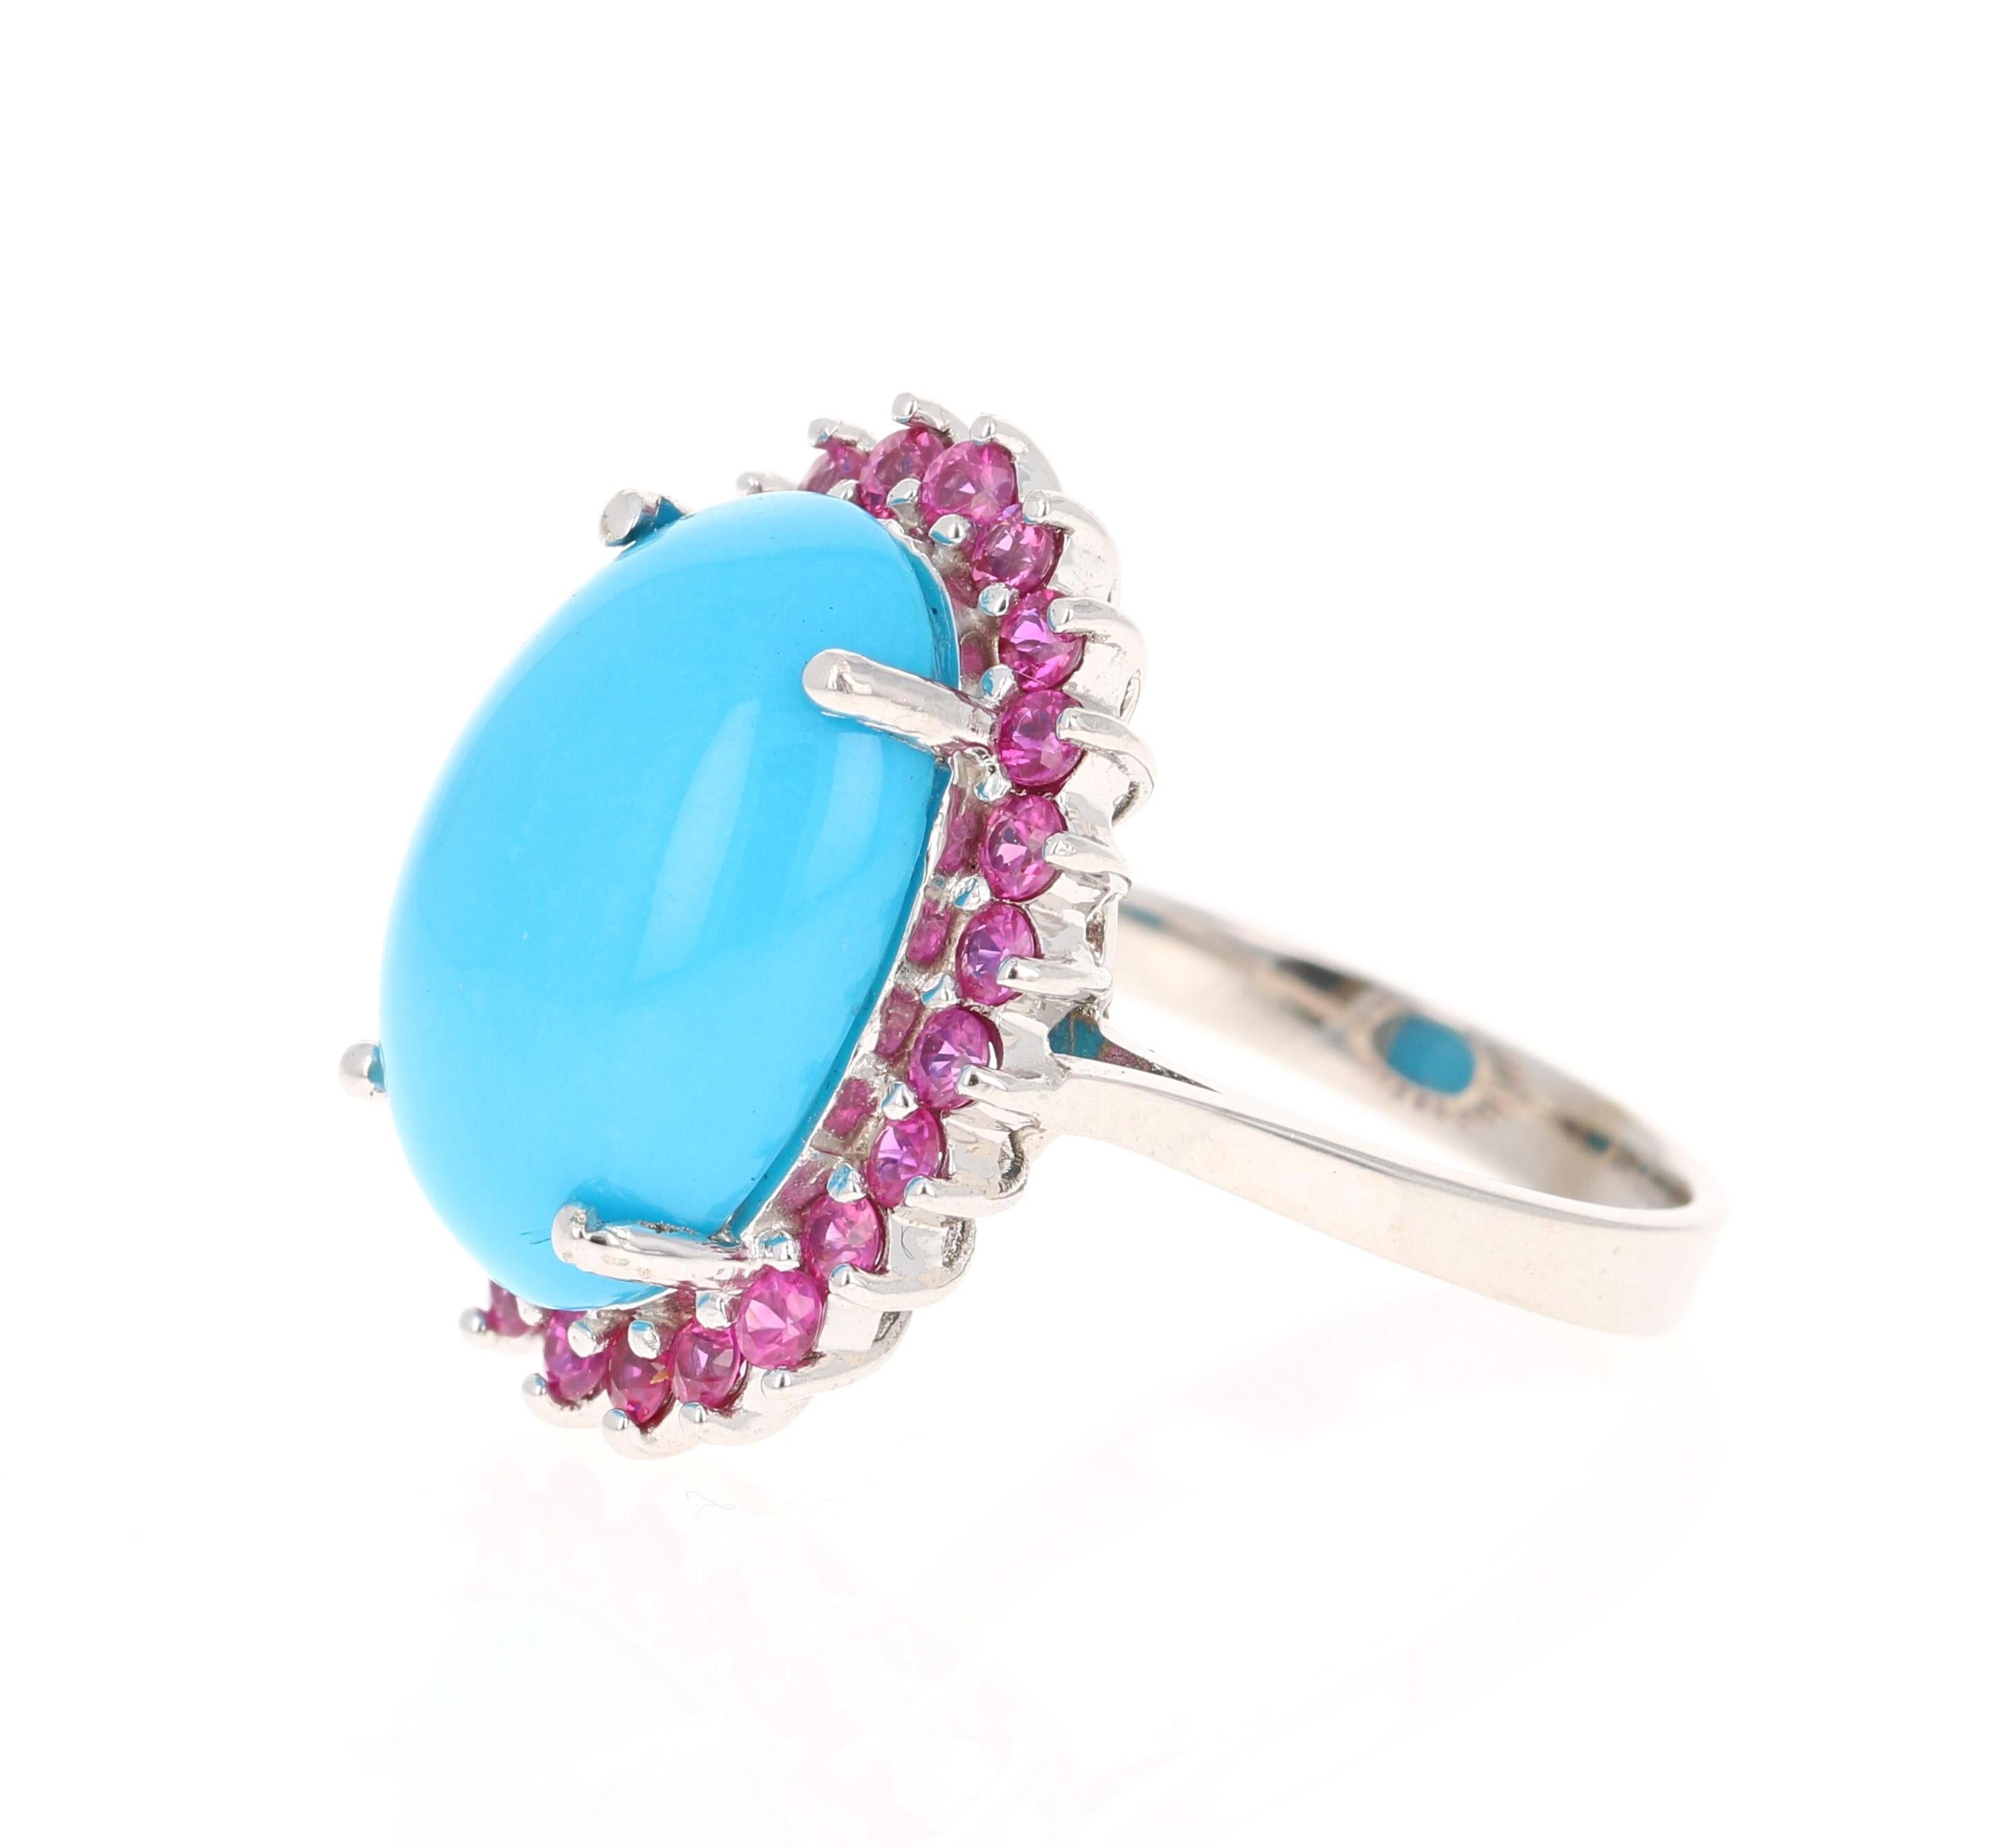 Contemporary 10.09 Carat Turquoise Pink Sapphire Cocktail Ring 14 Karat White Gold Ring For Sale